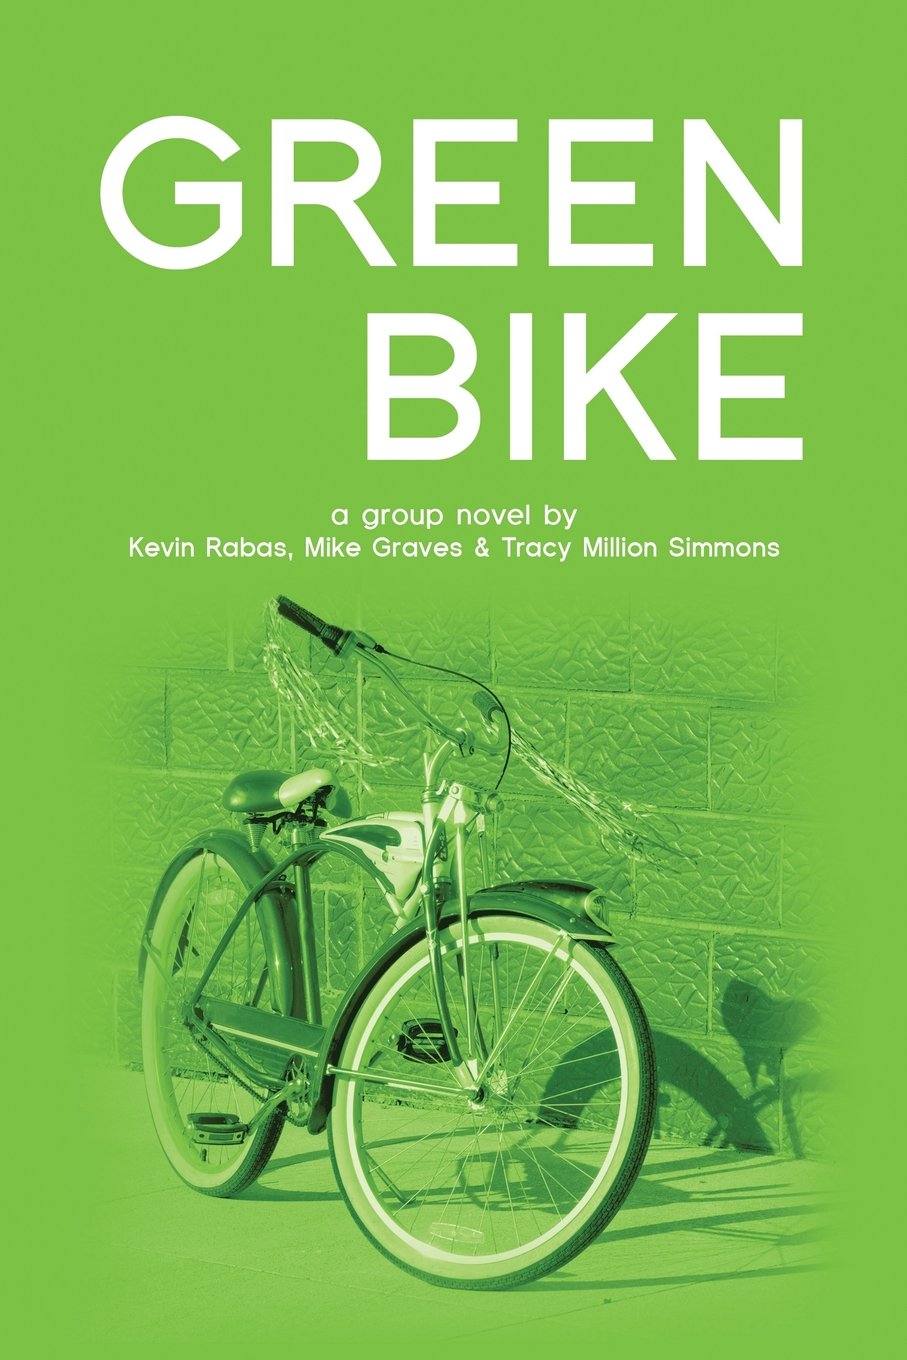 Cover of Green Bike by Kevin Rabas